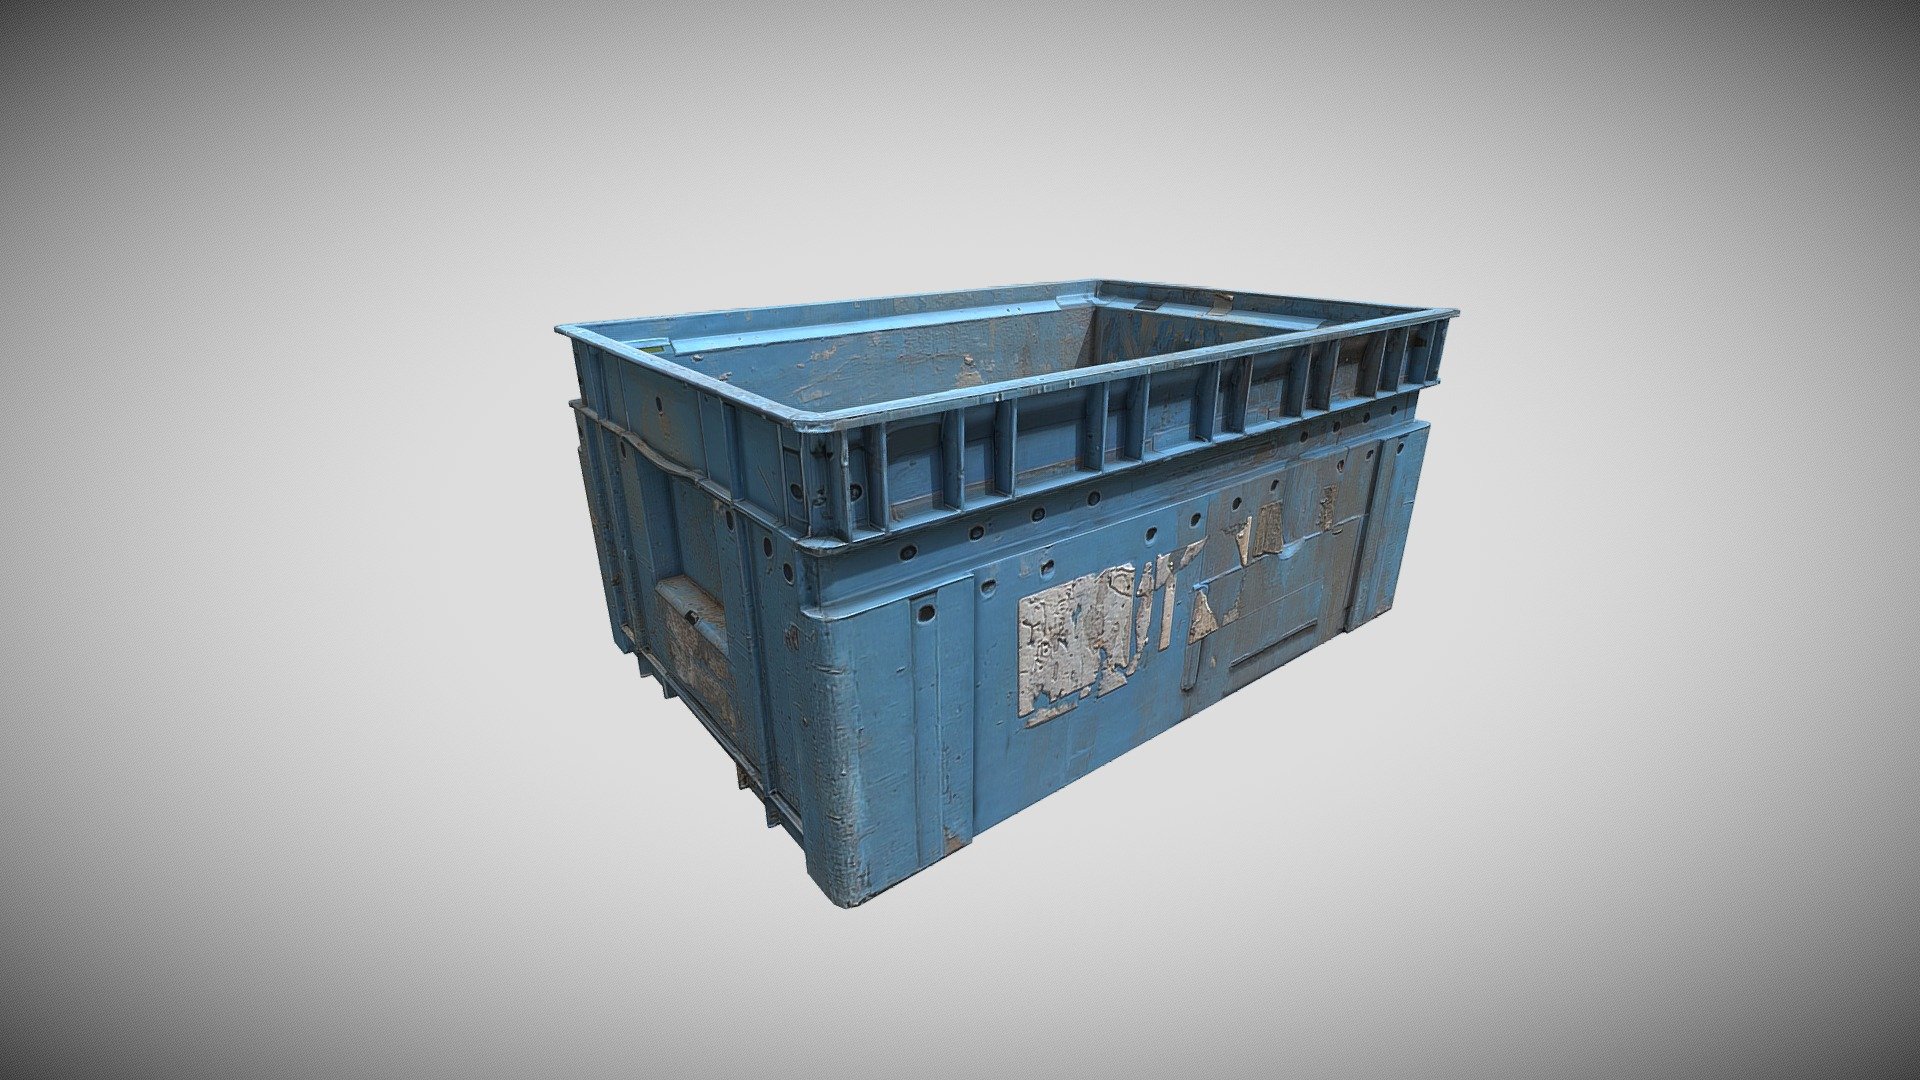 Container plastic box. Abandoned, destroy environment 3d model